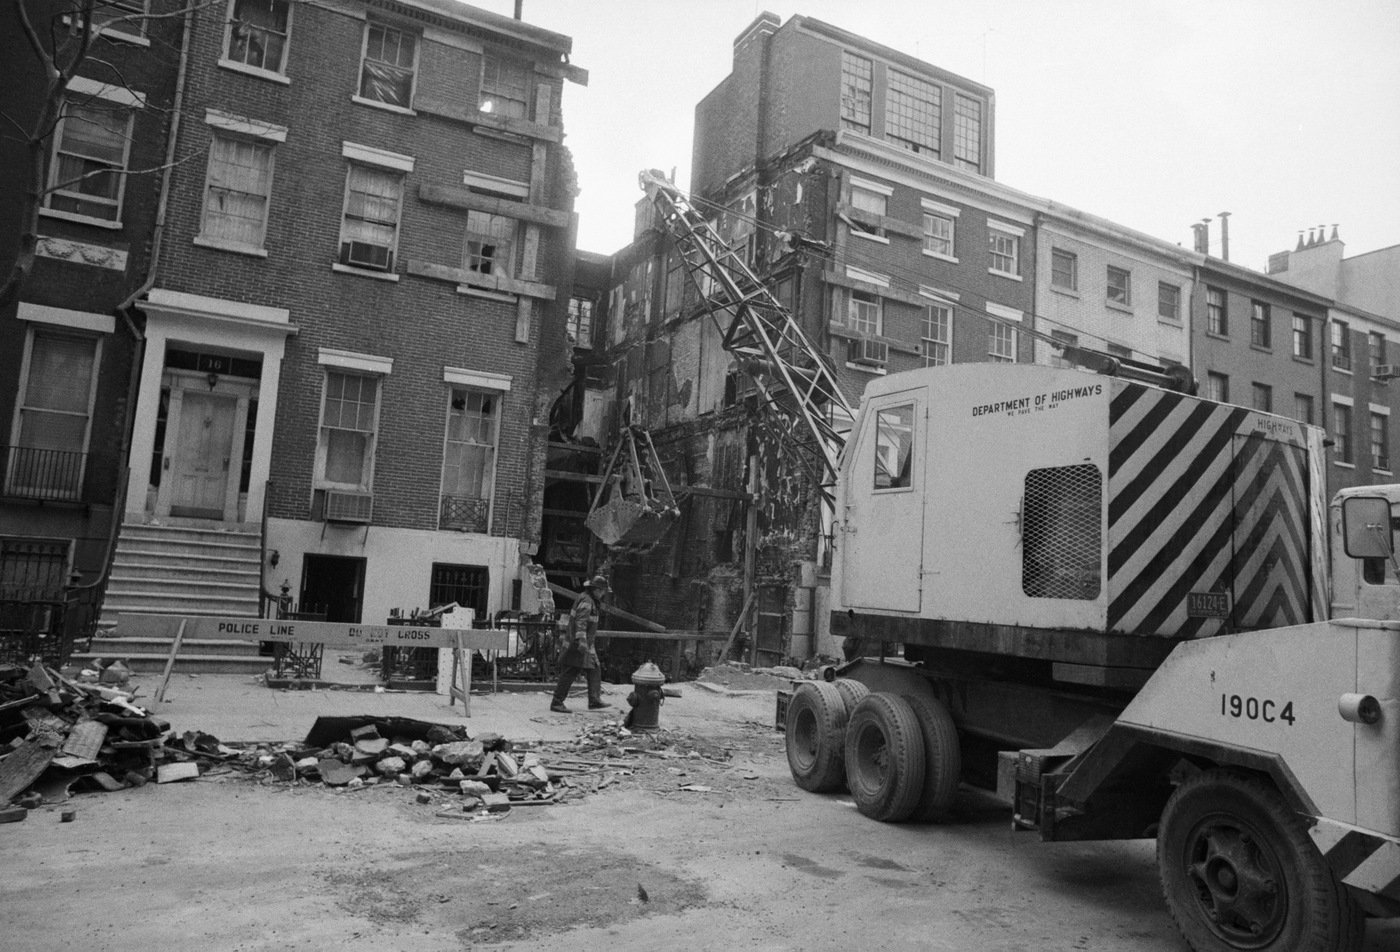 Three Weather Underground members were killed when a bomb they had built exploded in
the basement of a townhouse in Greenwich Village on March 6, 1970. In the days following the explosion, police found 57 sticks of dynamite, four completed bombs, detonators, timing devices, and other bomb-making equipment. Bettmann/Corbis photo.